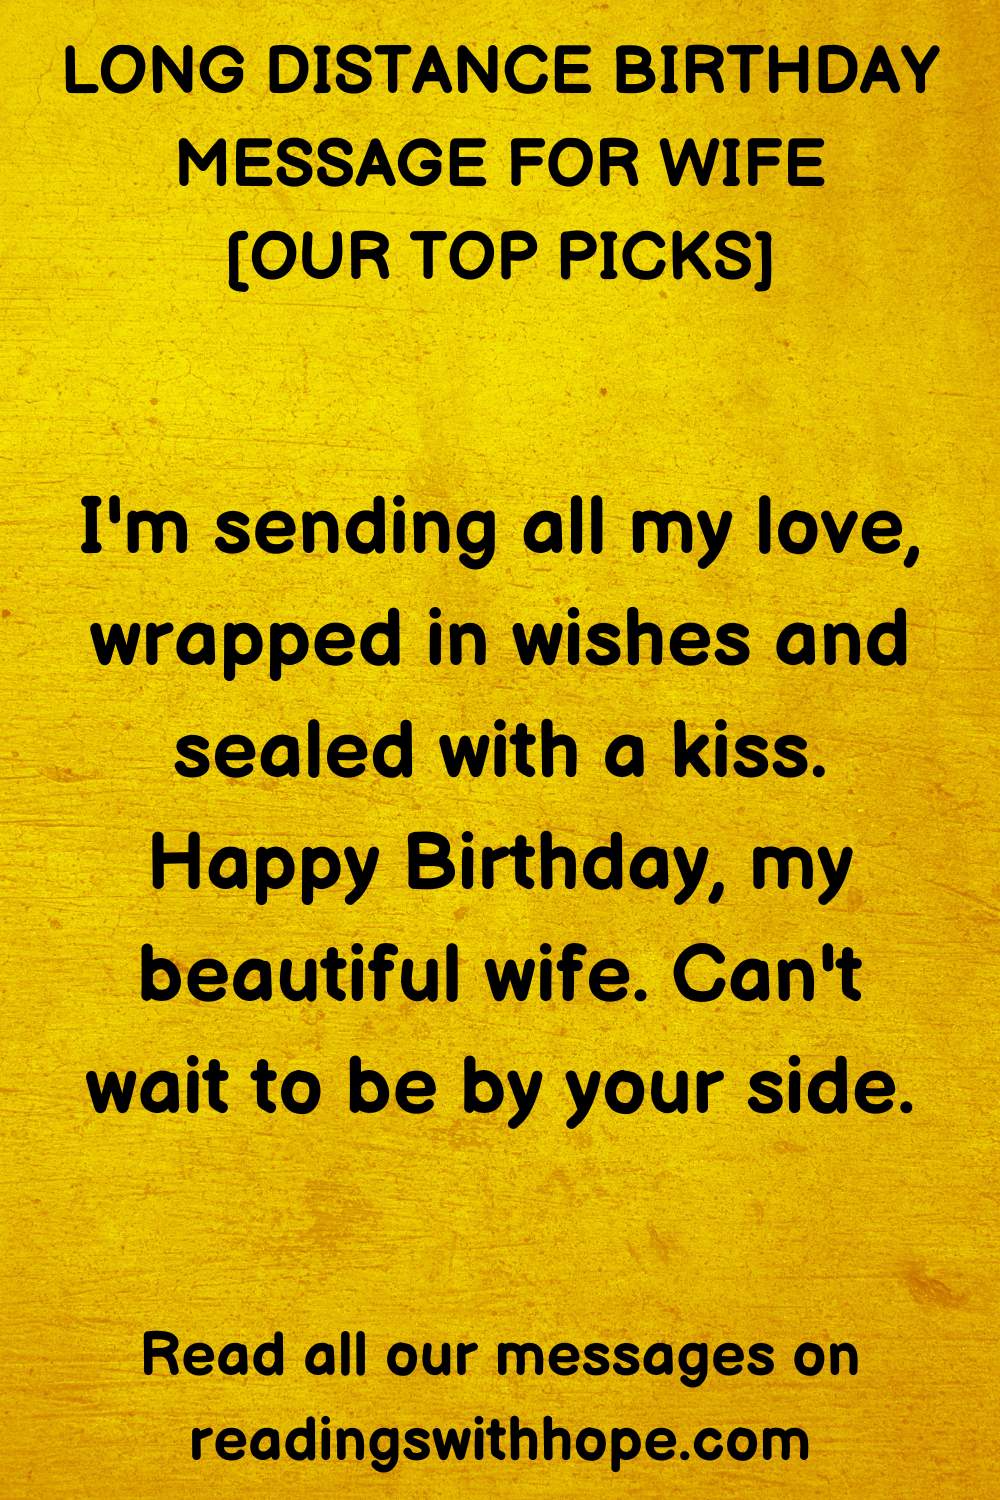 Long Distance Birthday Message for Wife 2